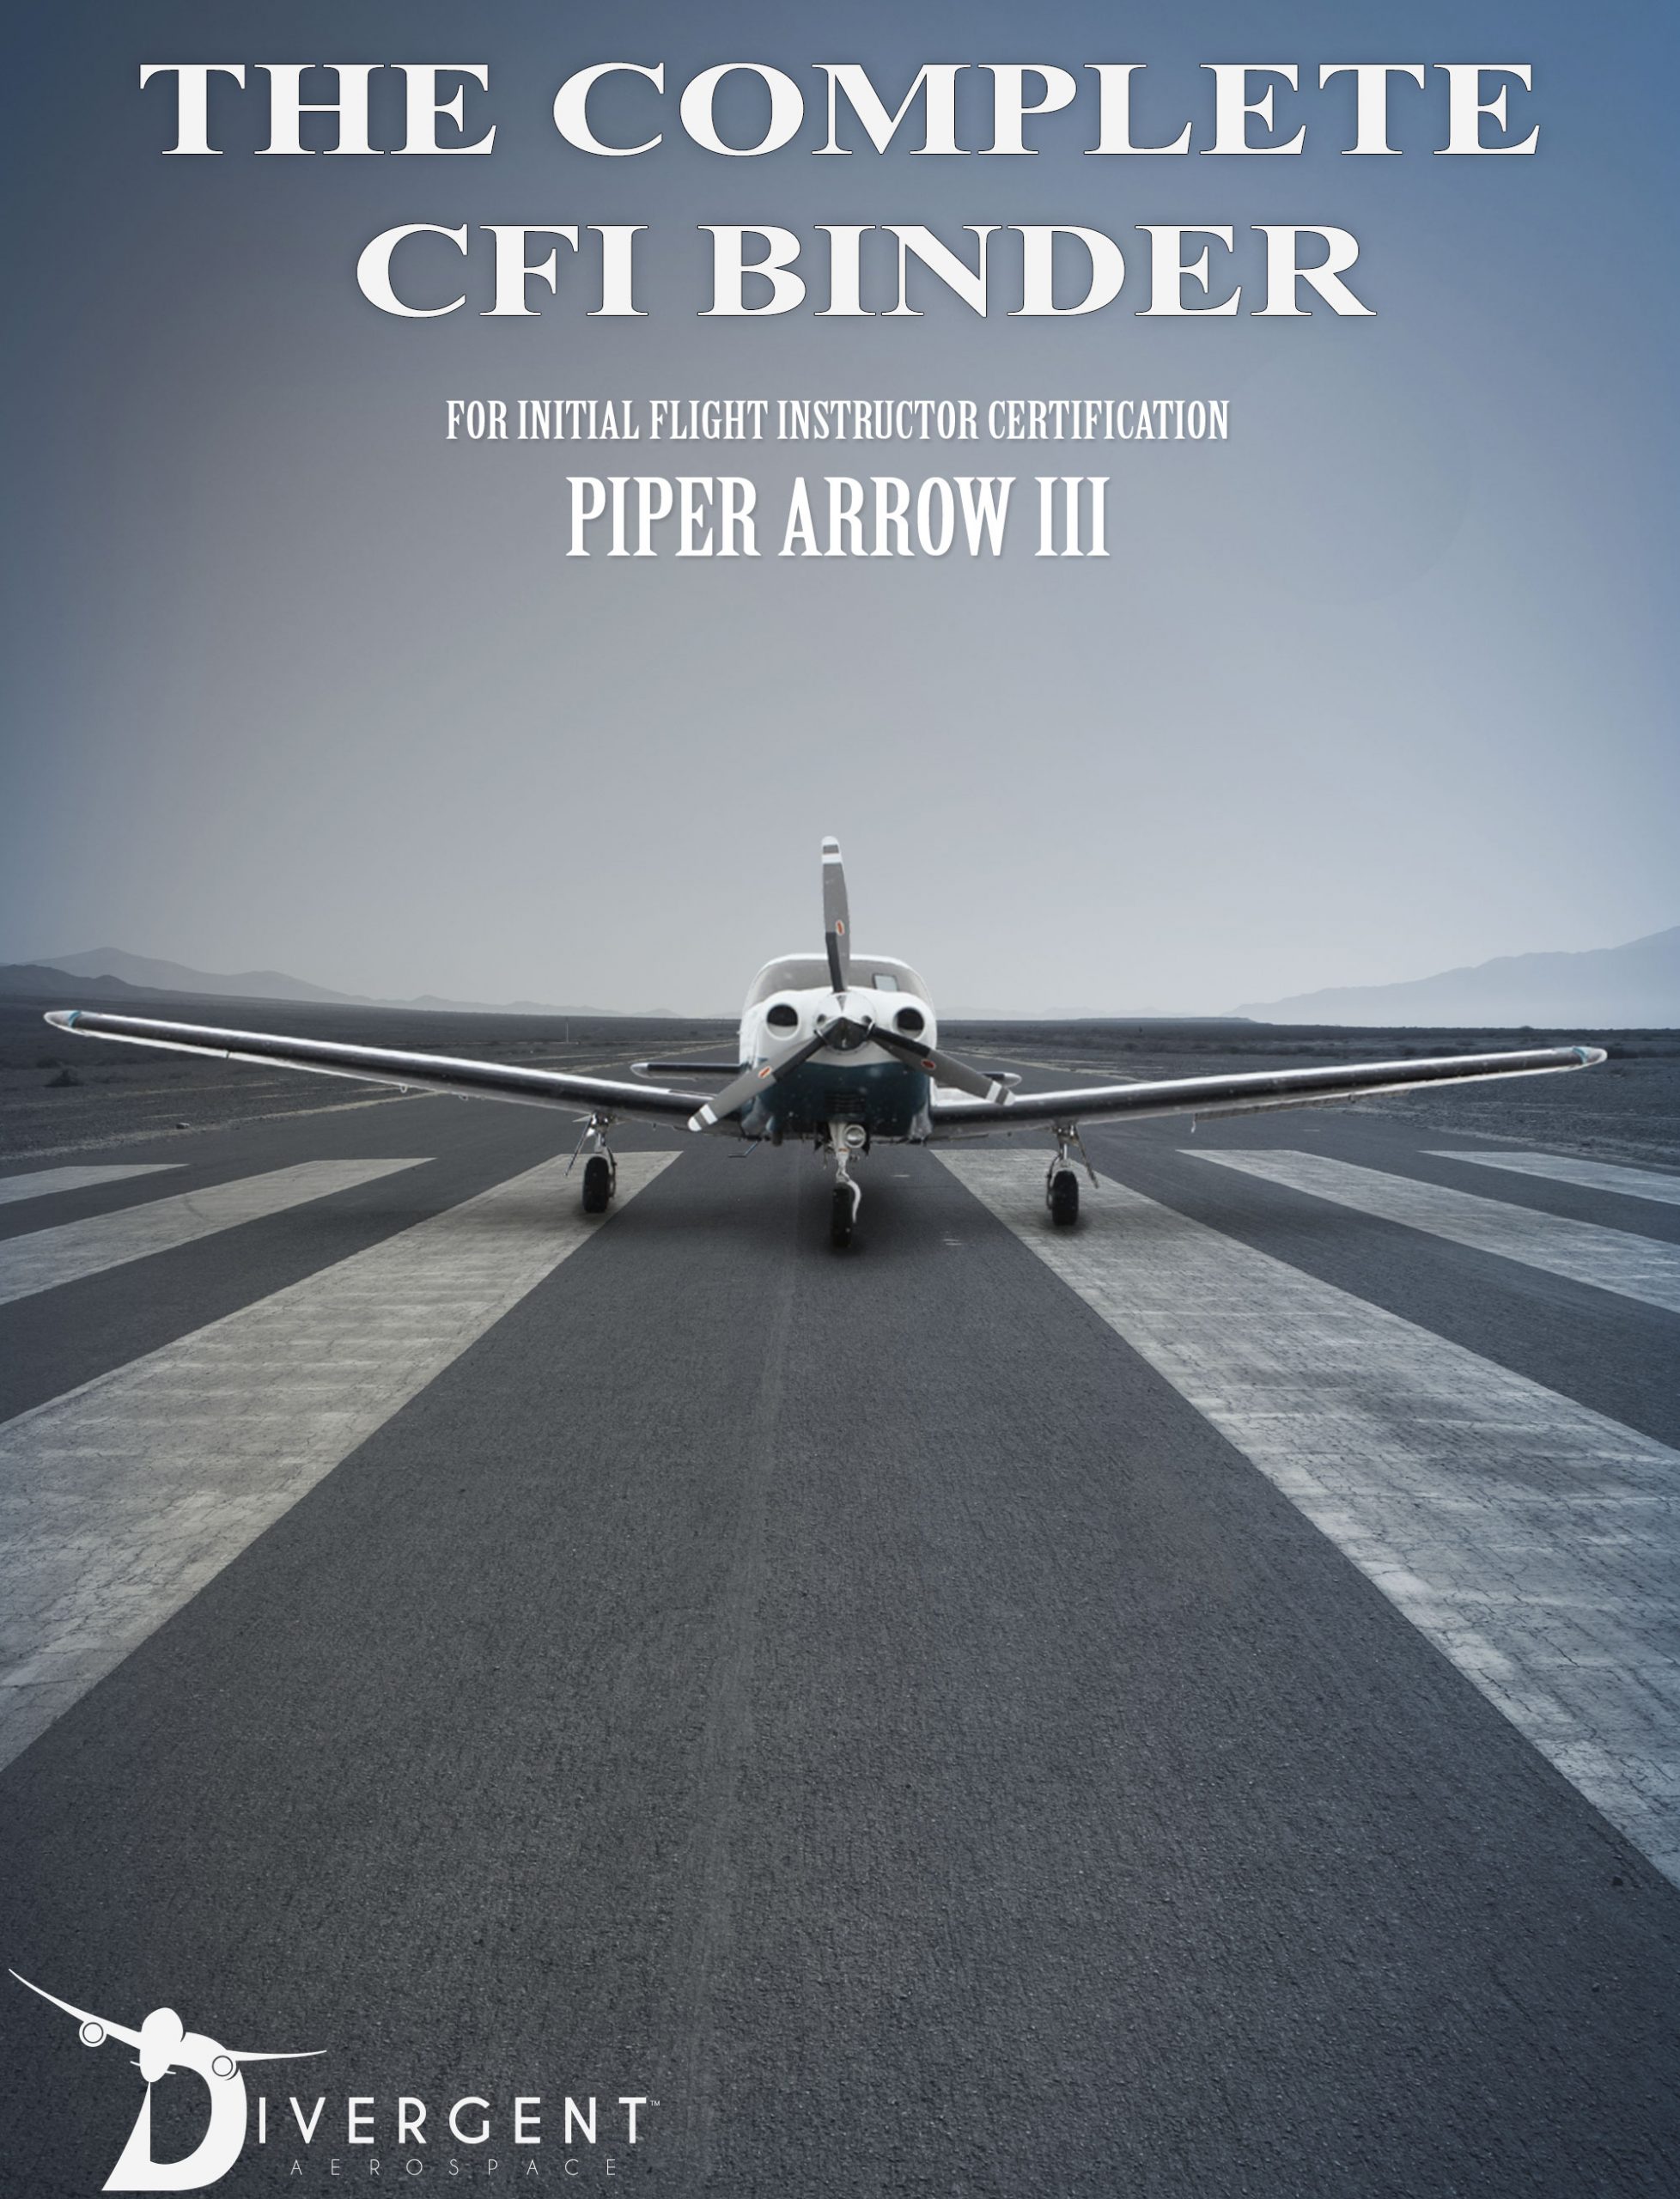 The Complete CFI Binder for Initial Flight Instructor Certification in a Piper Arrow III by Divergent Aerospace